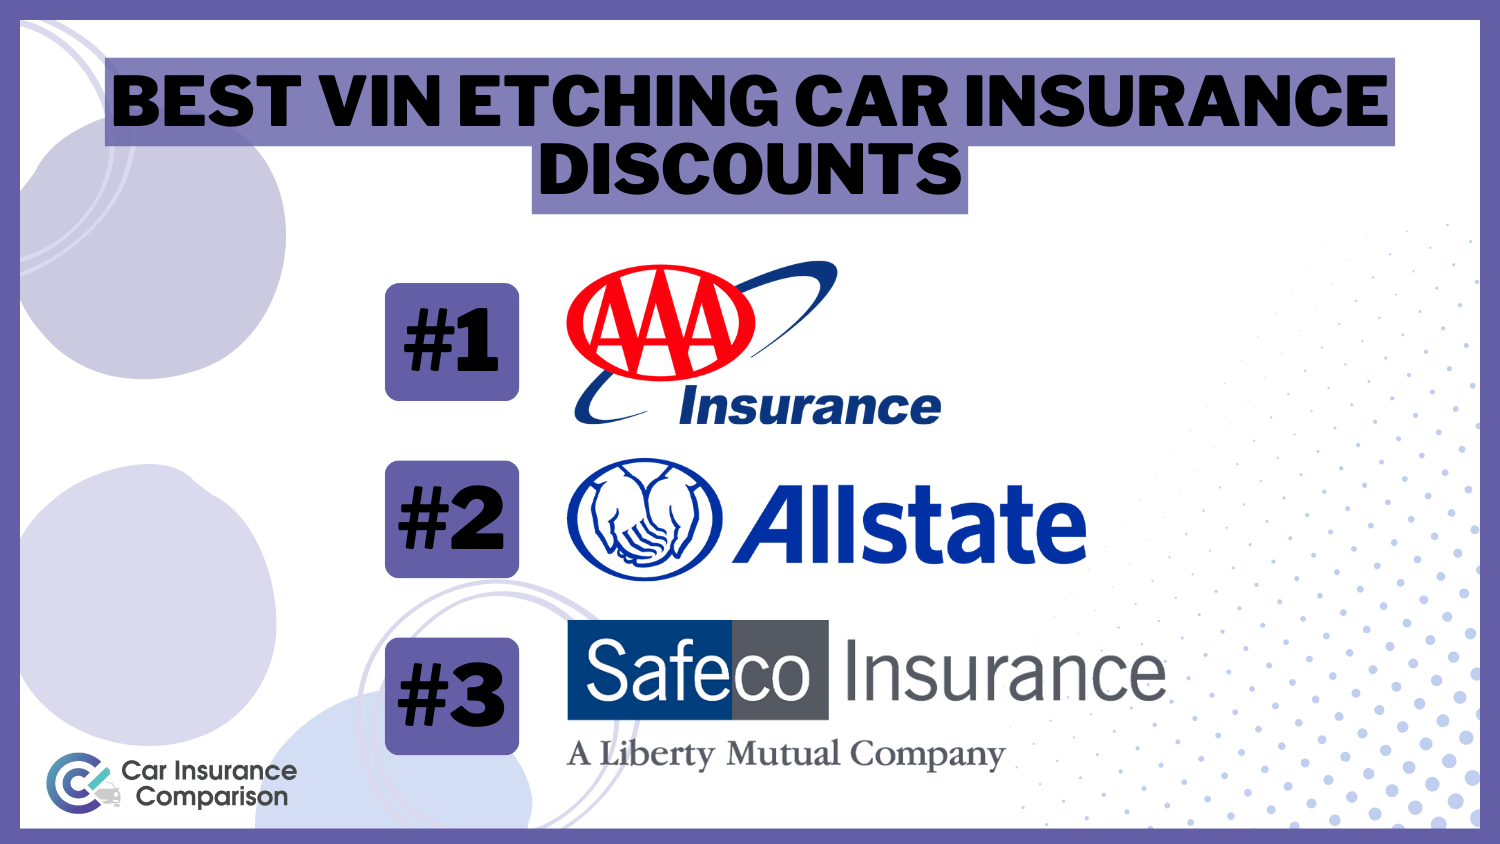 Best VIN Etching Car Insurance Discounts: AAA, Allstate, and Safeco